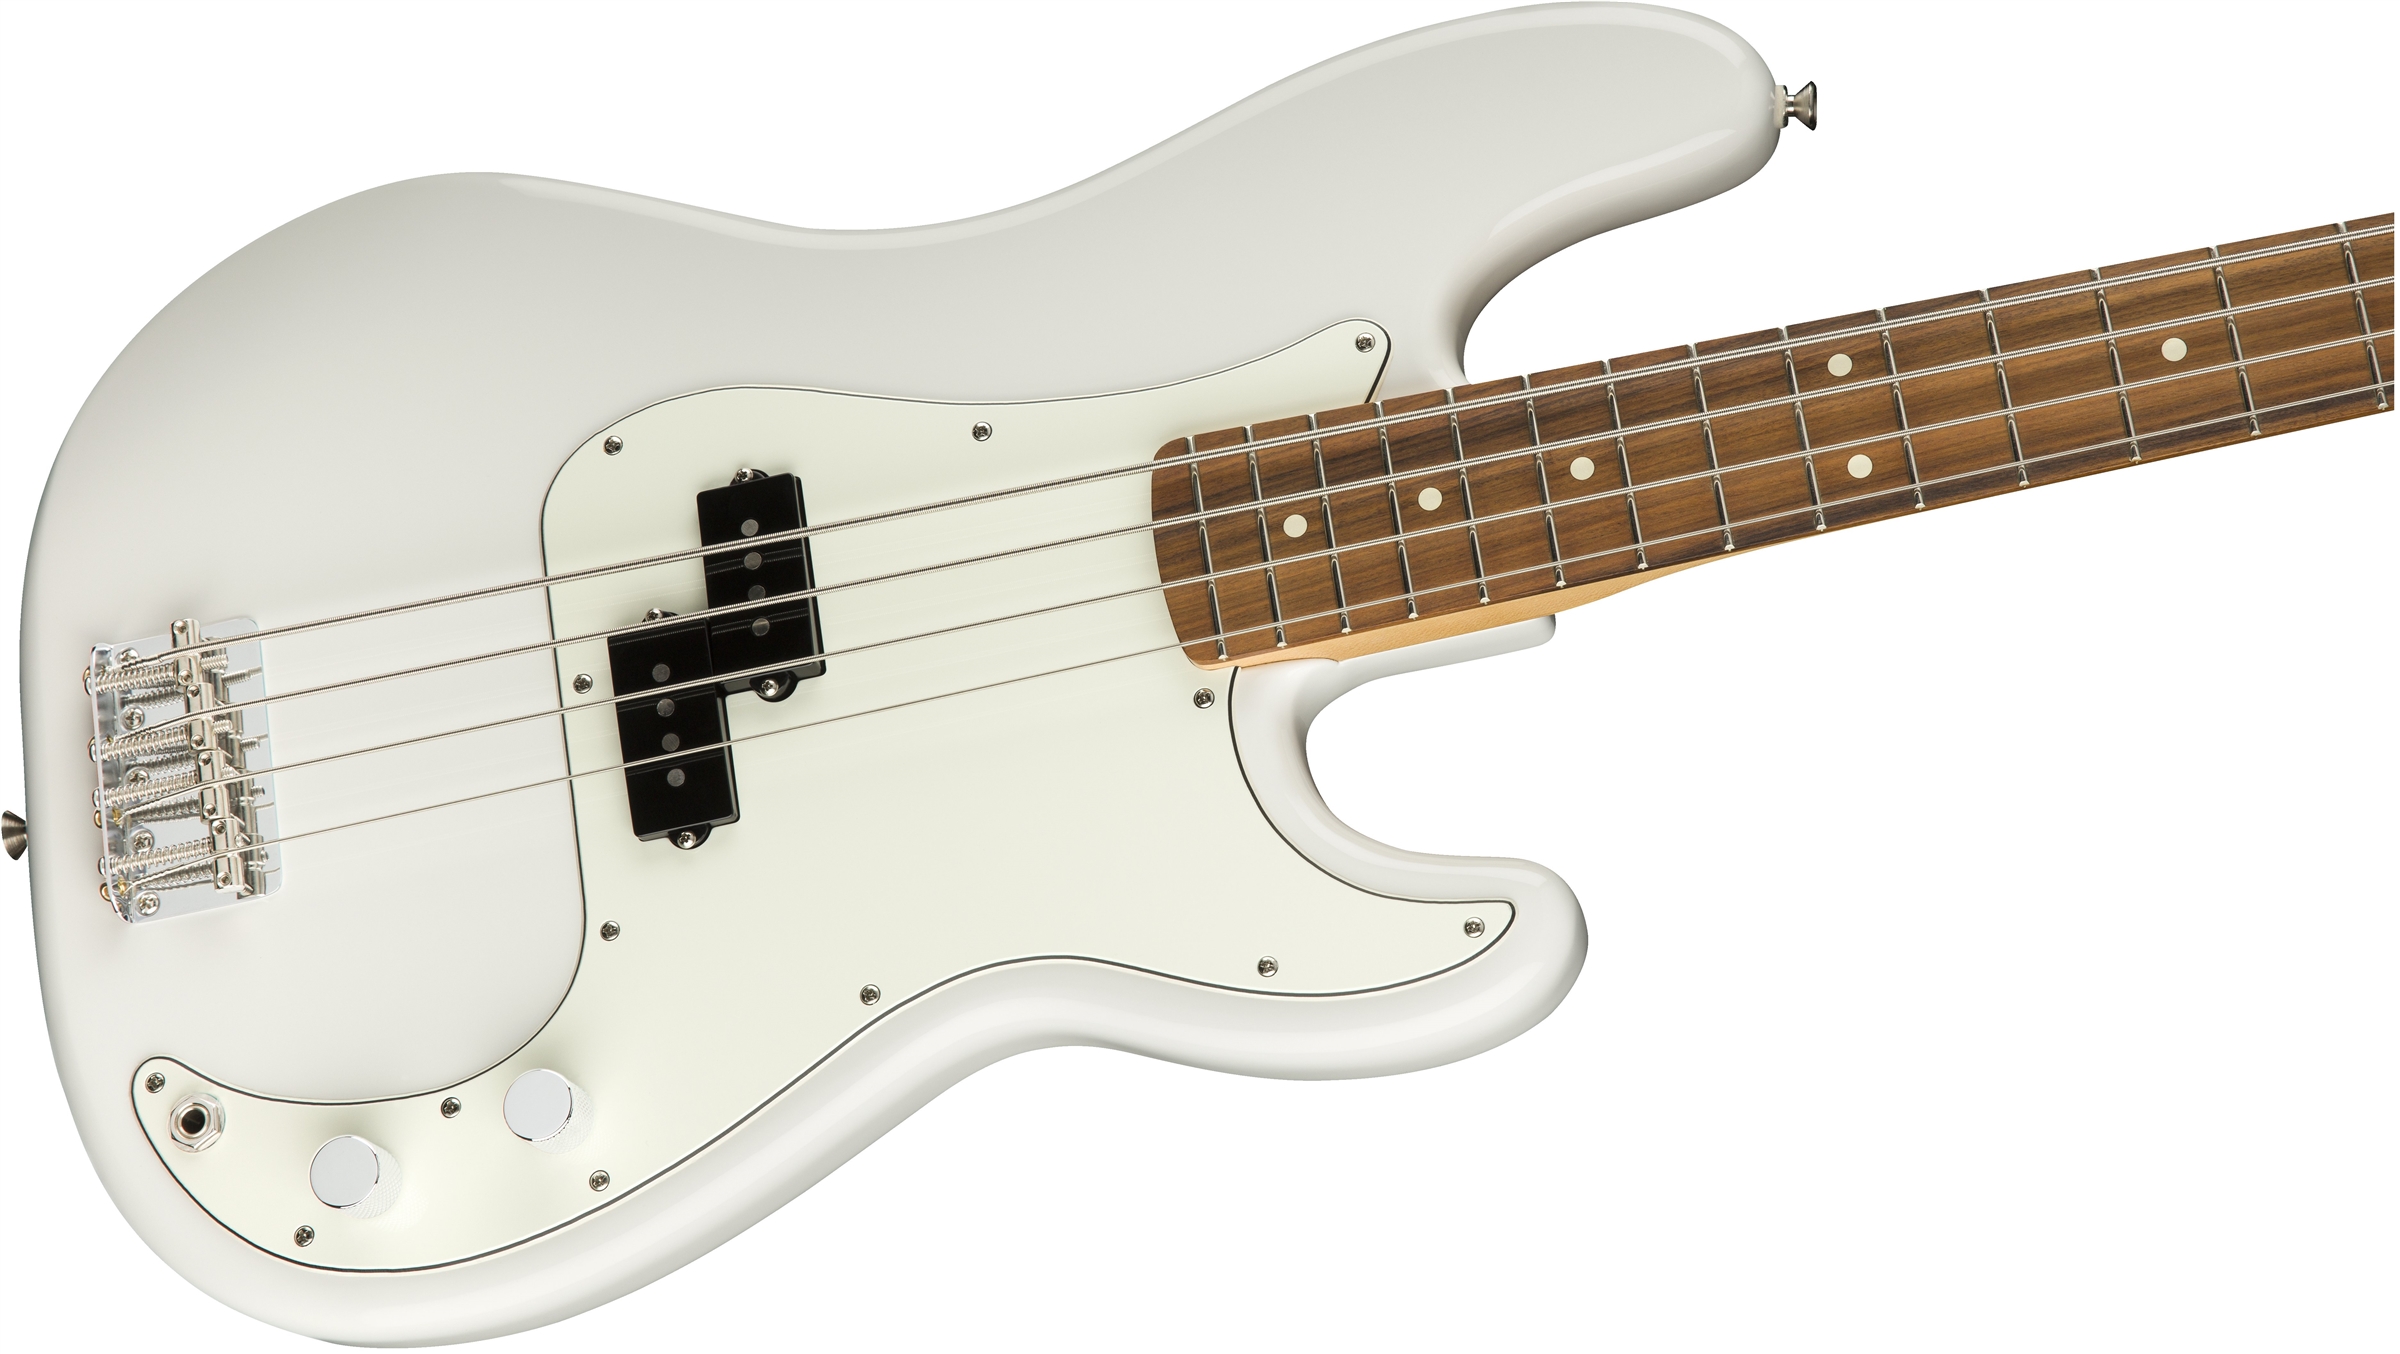 Fender Precision Bass Player Mex Pf - Polar White - Solid body electric bass - Variation 3